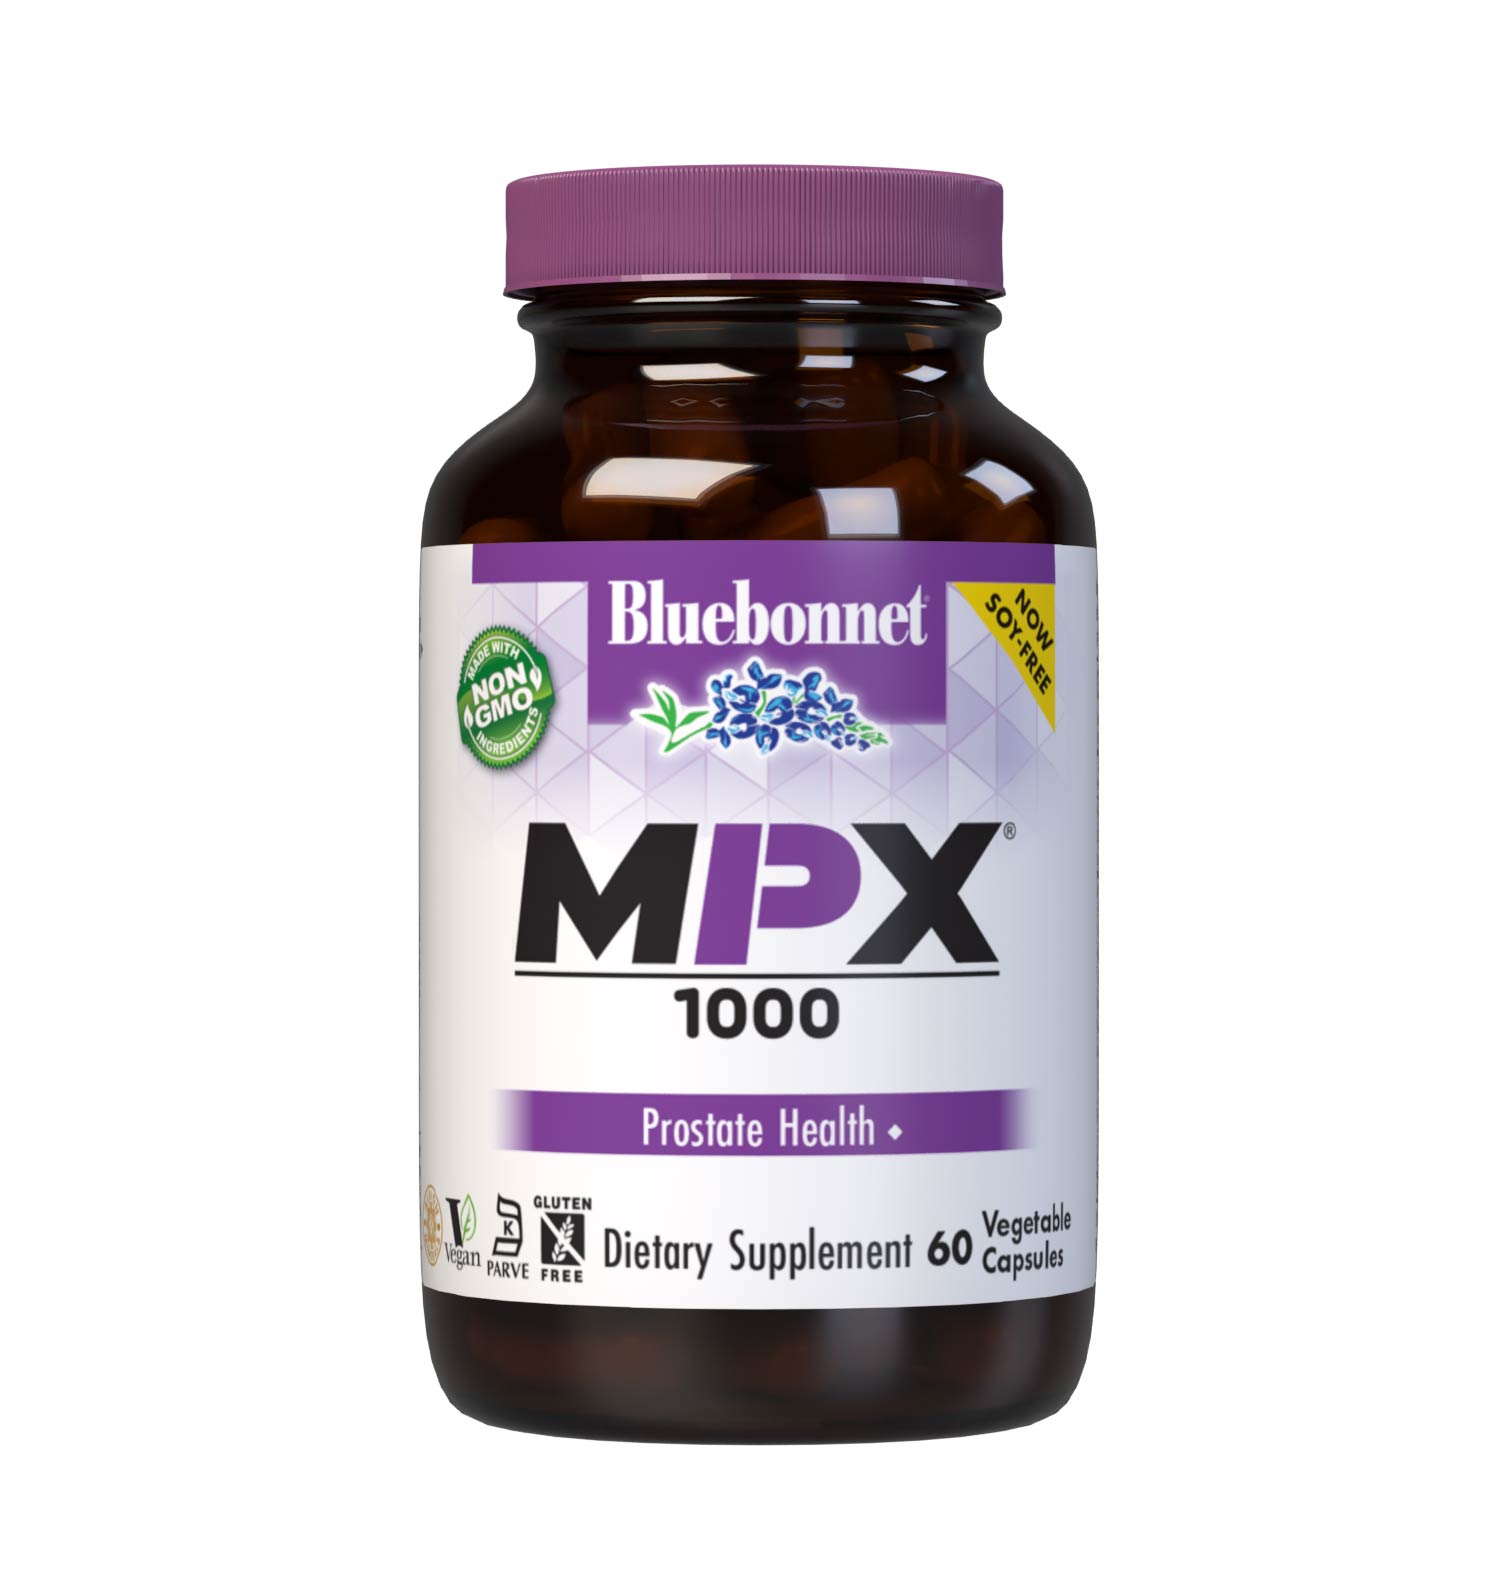 Bluebonnet’s MPX 1000 Prostate Support 60 Vegetable Capsules are scientifically formulated with innovative and complementary nutrients to support men’s prostate health, such as standardized saw palmetto berry, green tea leaf and stinging nettle root extracts, plus beta-sitosterol, pumpkin and flax seed powders with vitamin B6 and the coveted 10:1 ratio of zinc and copper in more bioavailable amino acid chelate forms. #size_60 count